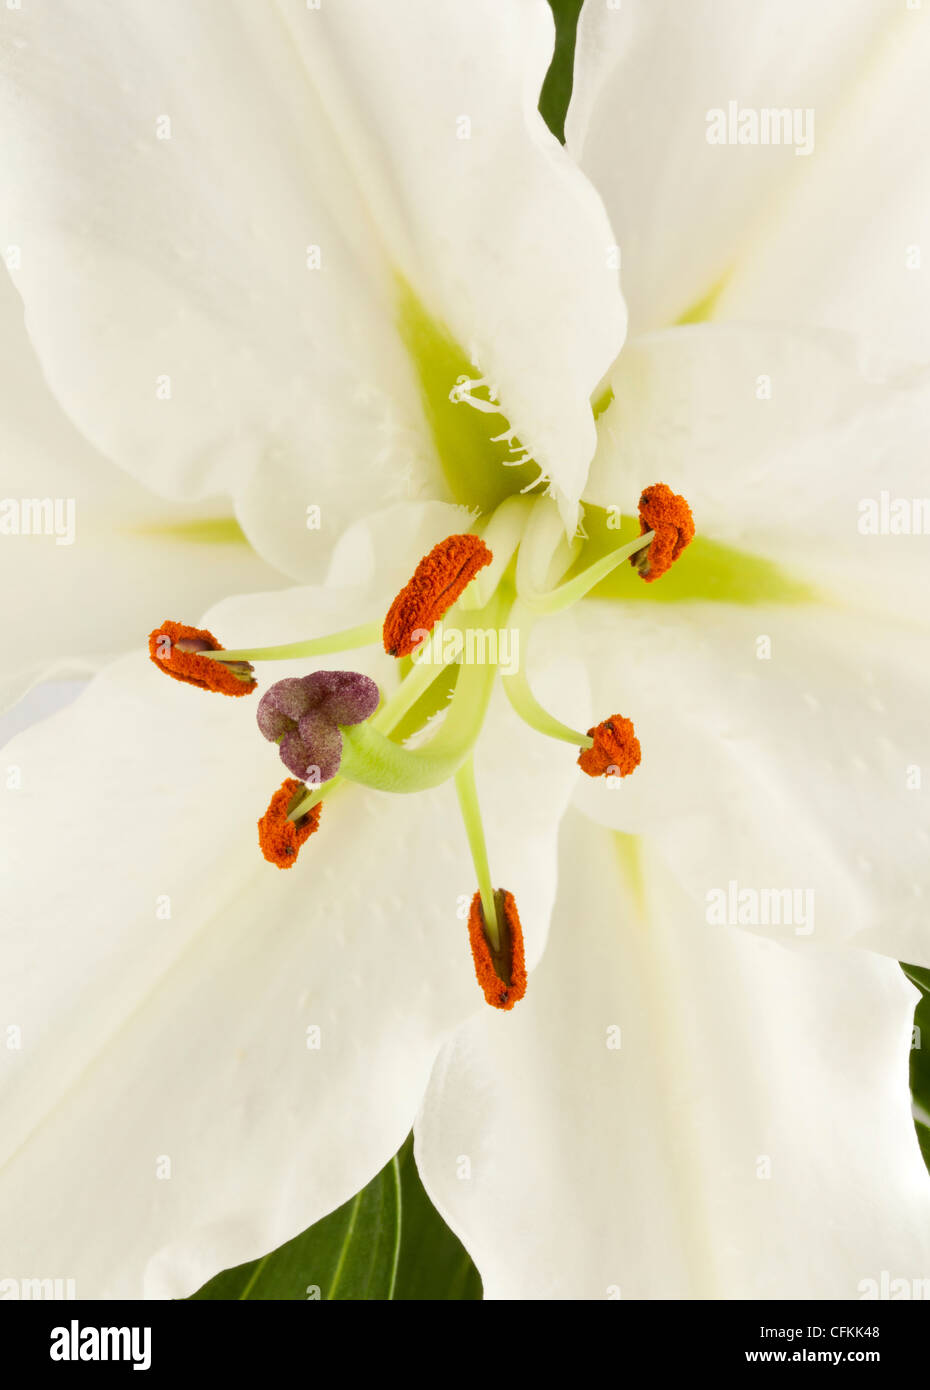 A white Lily flower Stock Photo